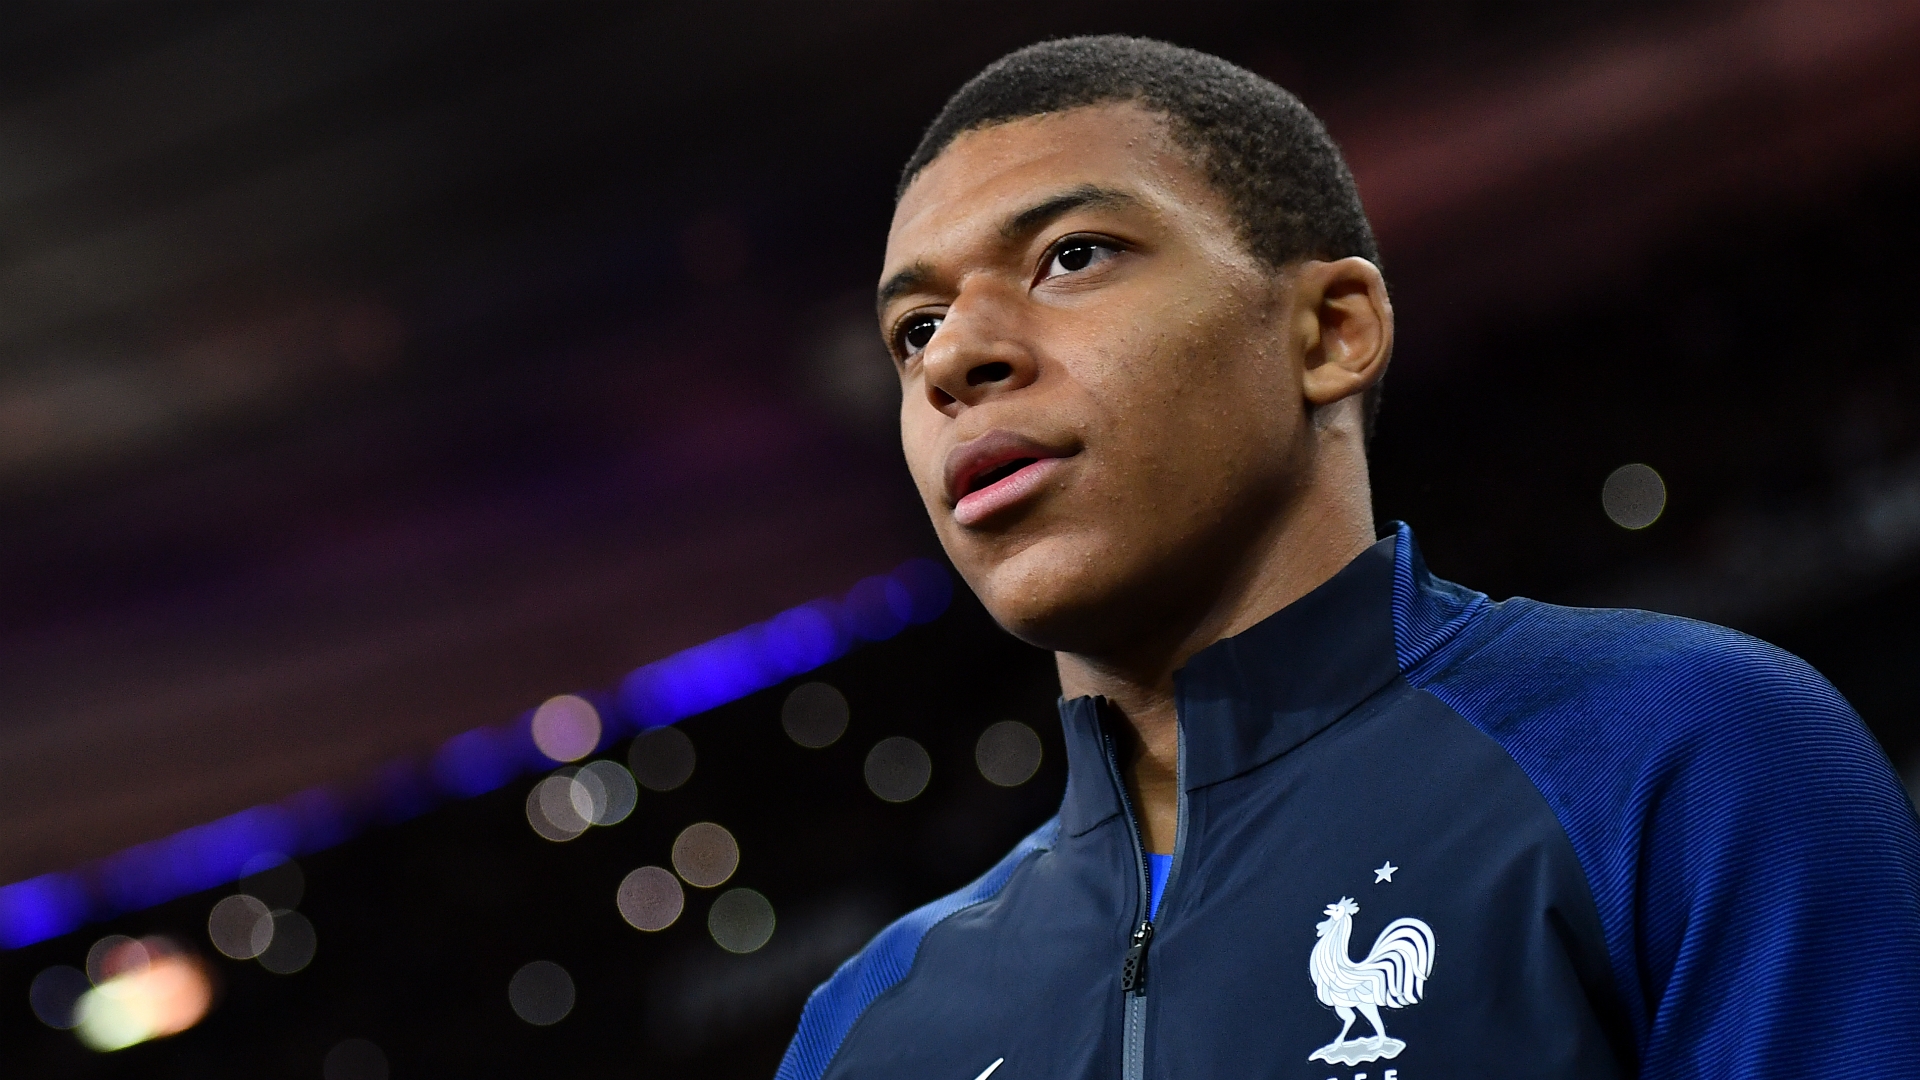 Leboeuf believes Real could sign Mbappe and let him play for Real one more season